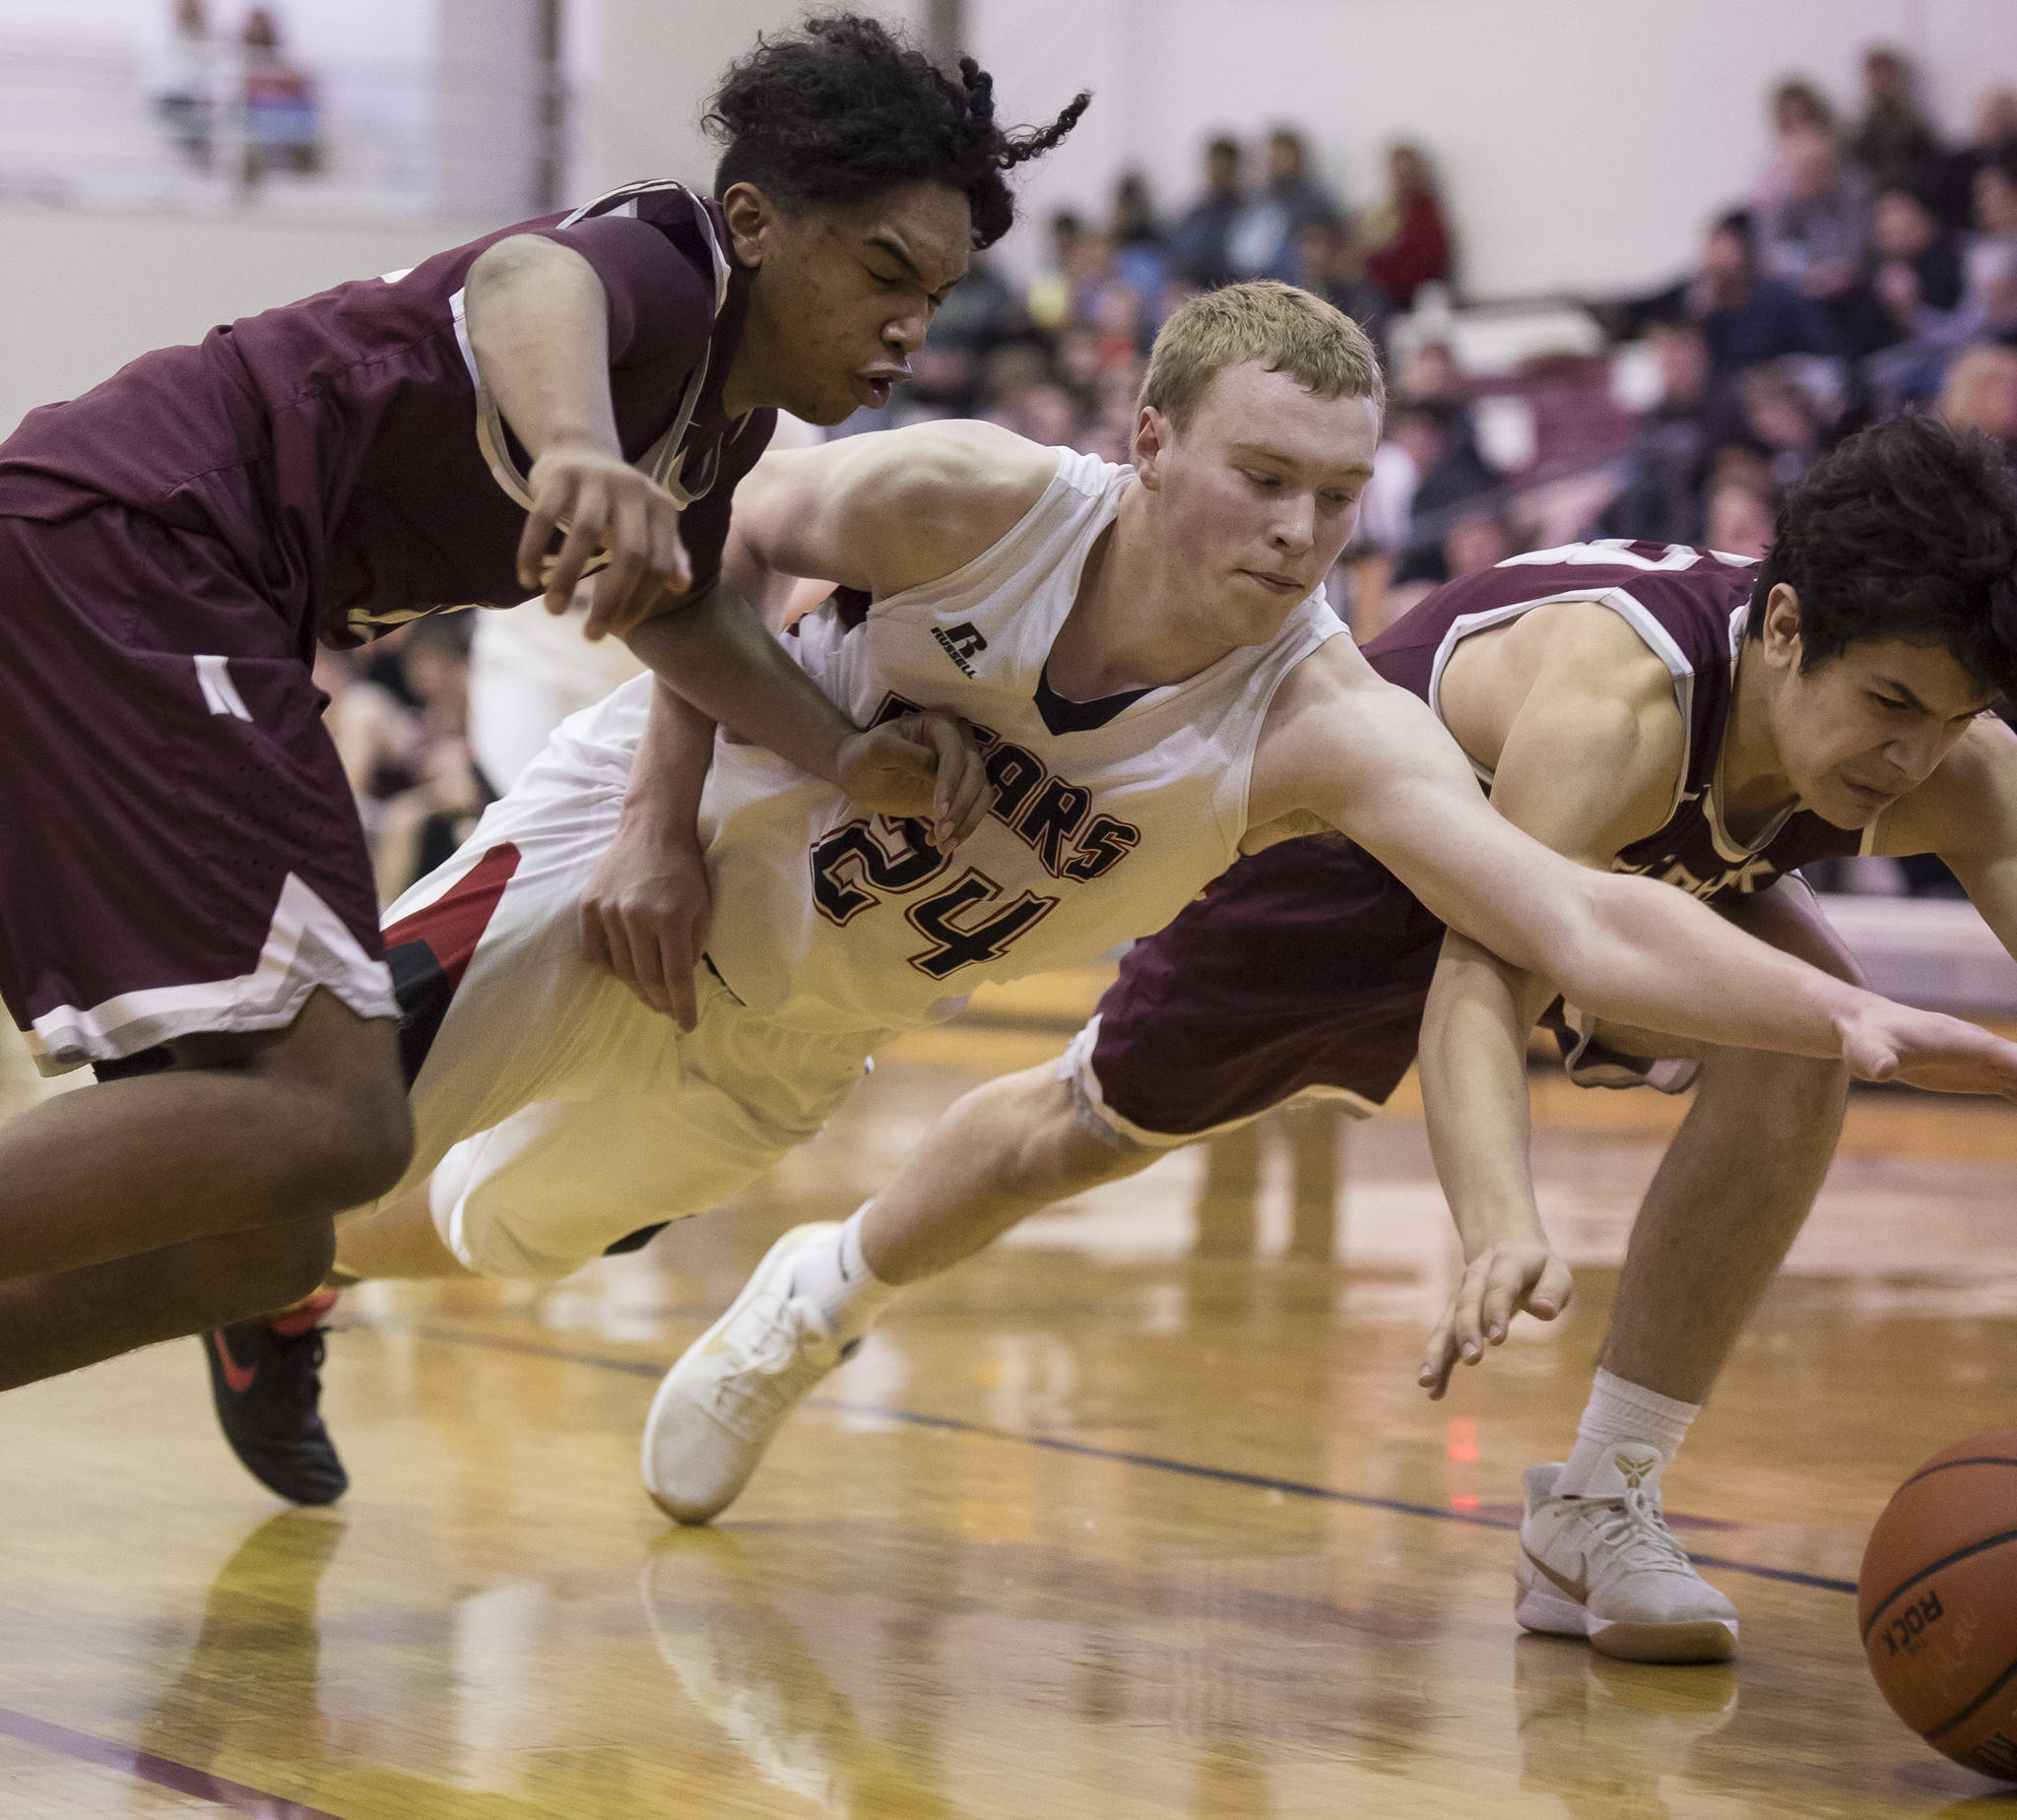 Juneau-Douglas’ Erik Kelly, center, dives for a ball against Ketchikan’s Chris Lee, left, and James Nordlund at JDHS on Wednesday, Feb. 21, 2018. JDHS won 59-41.